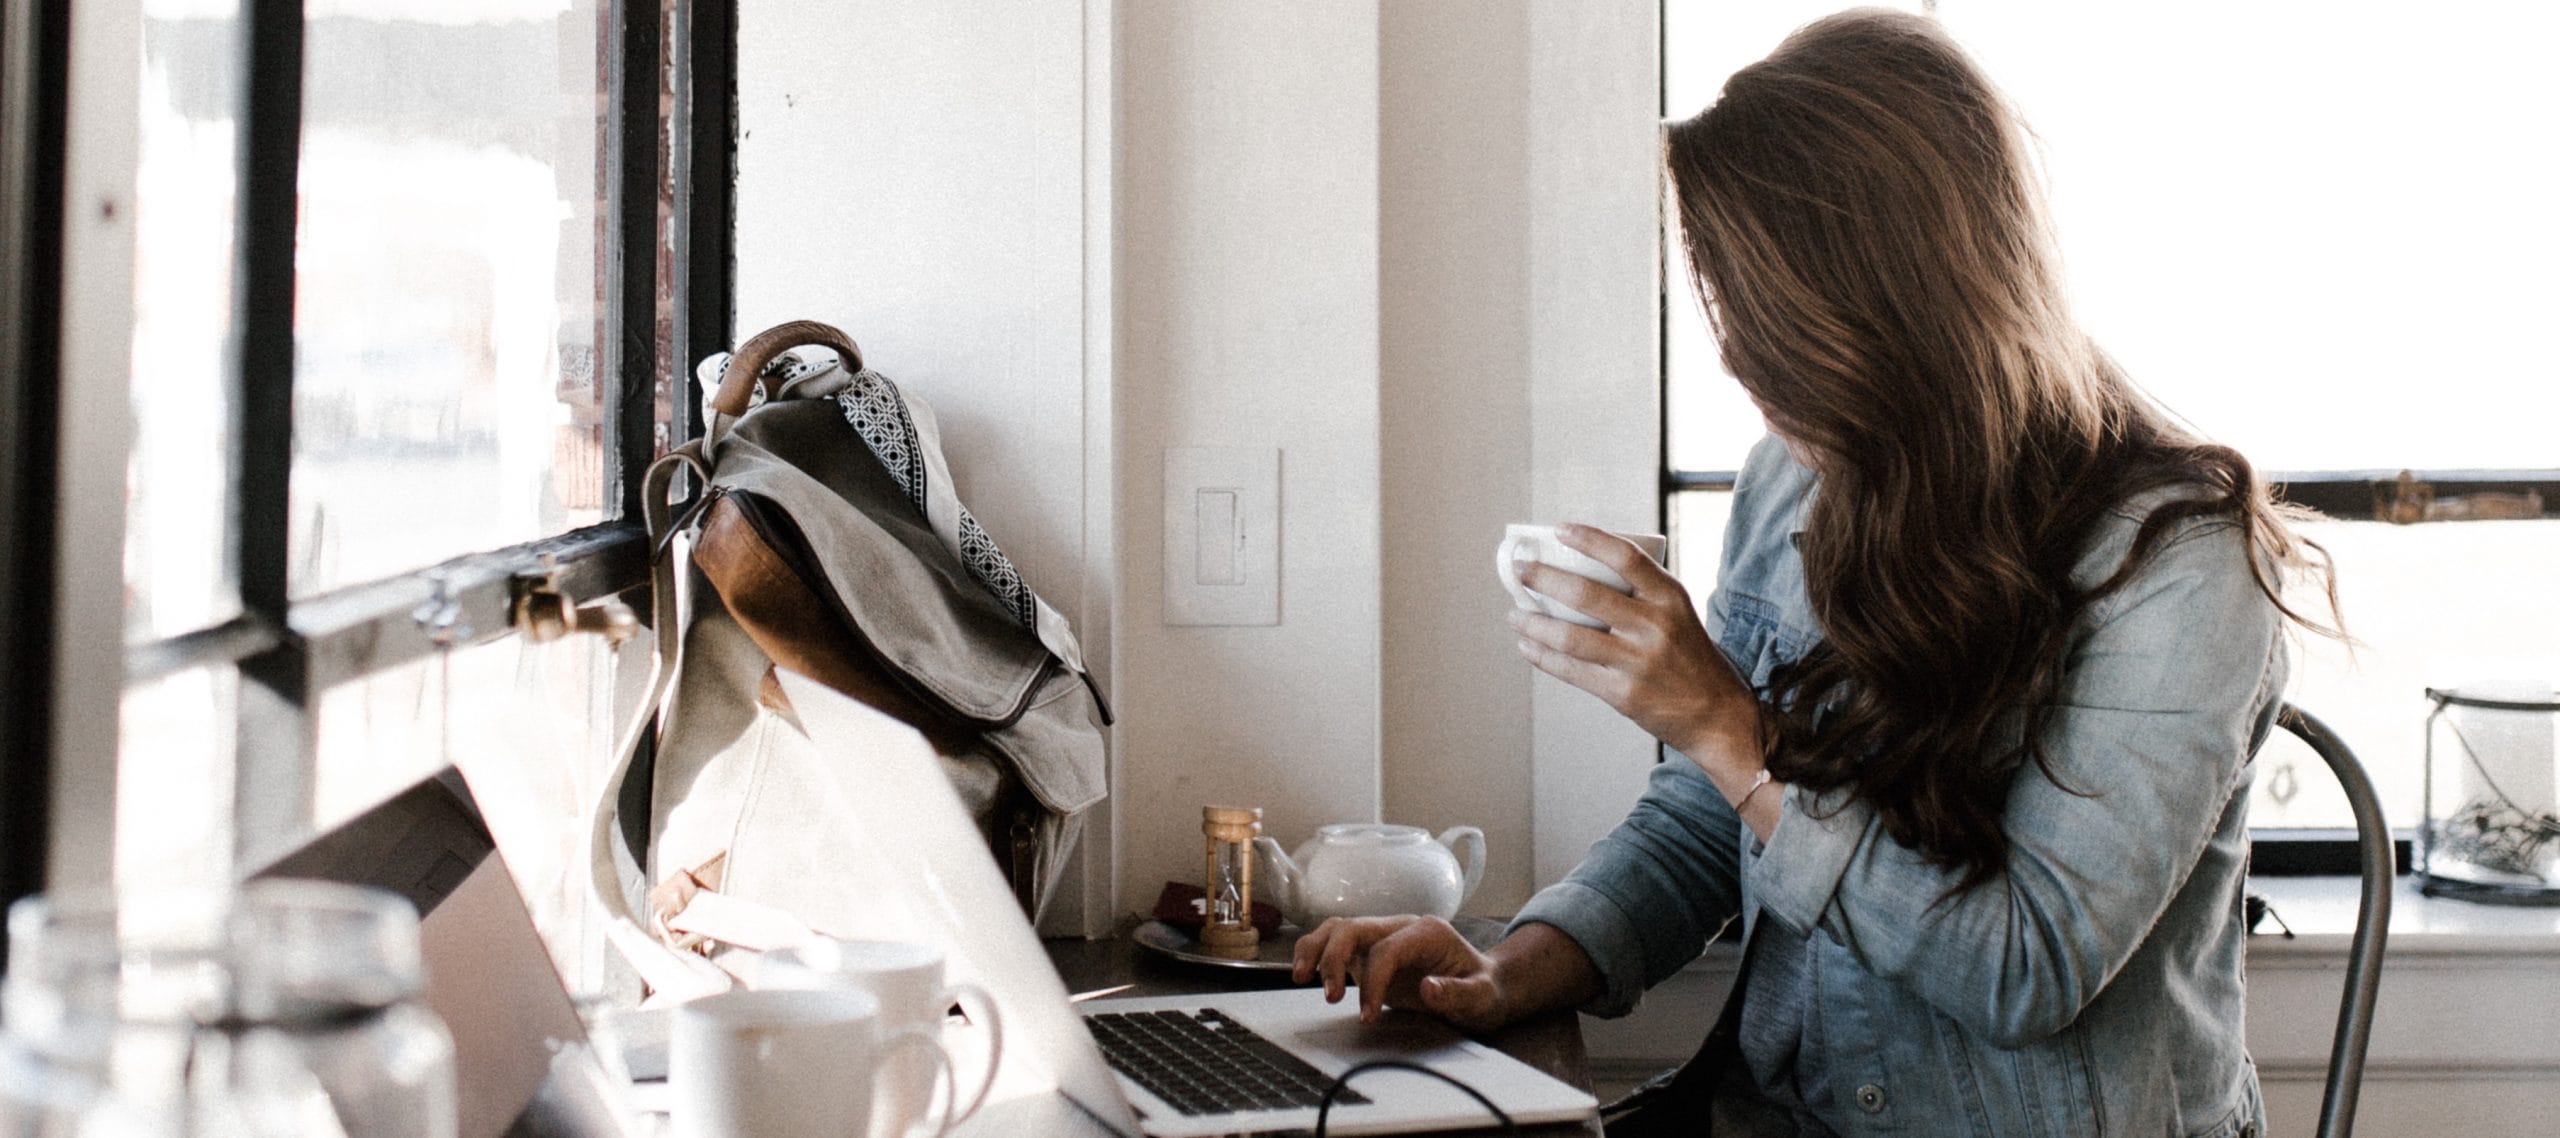 A woman drinking coffee working on her laptop